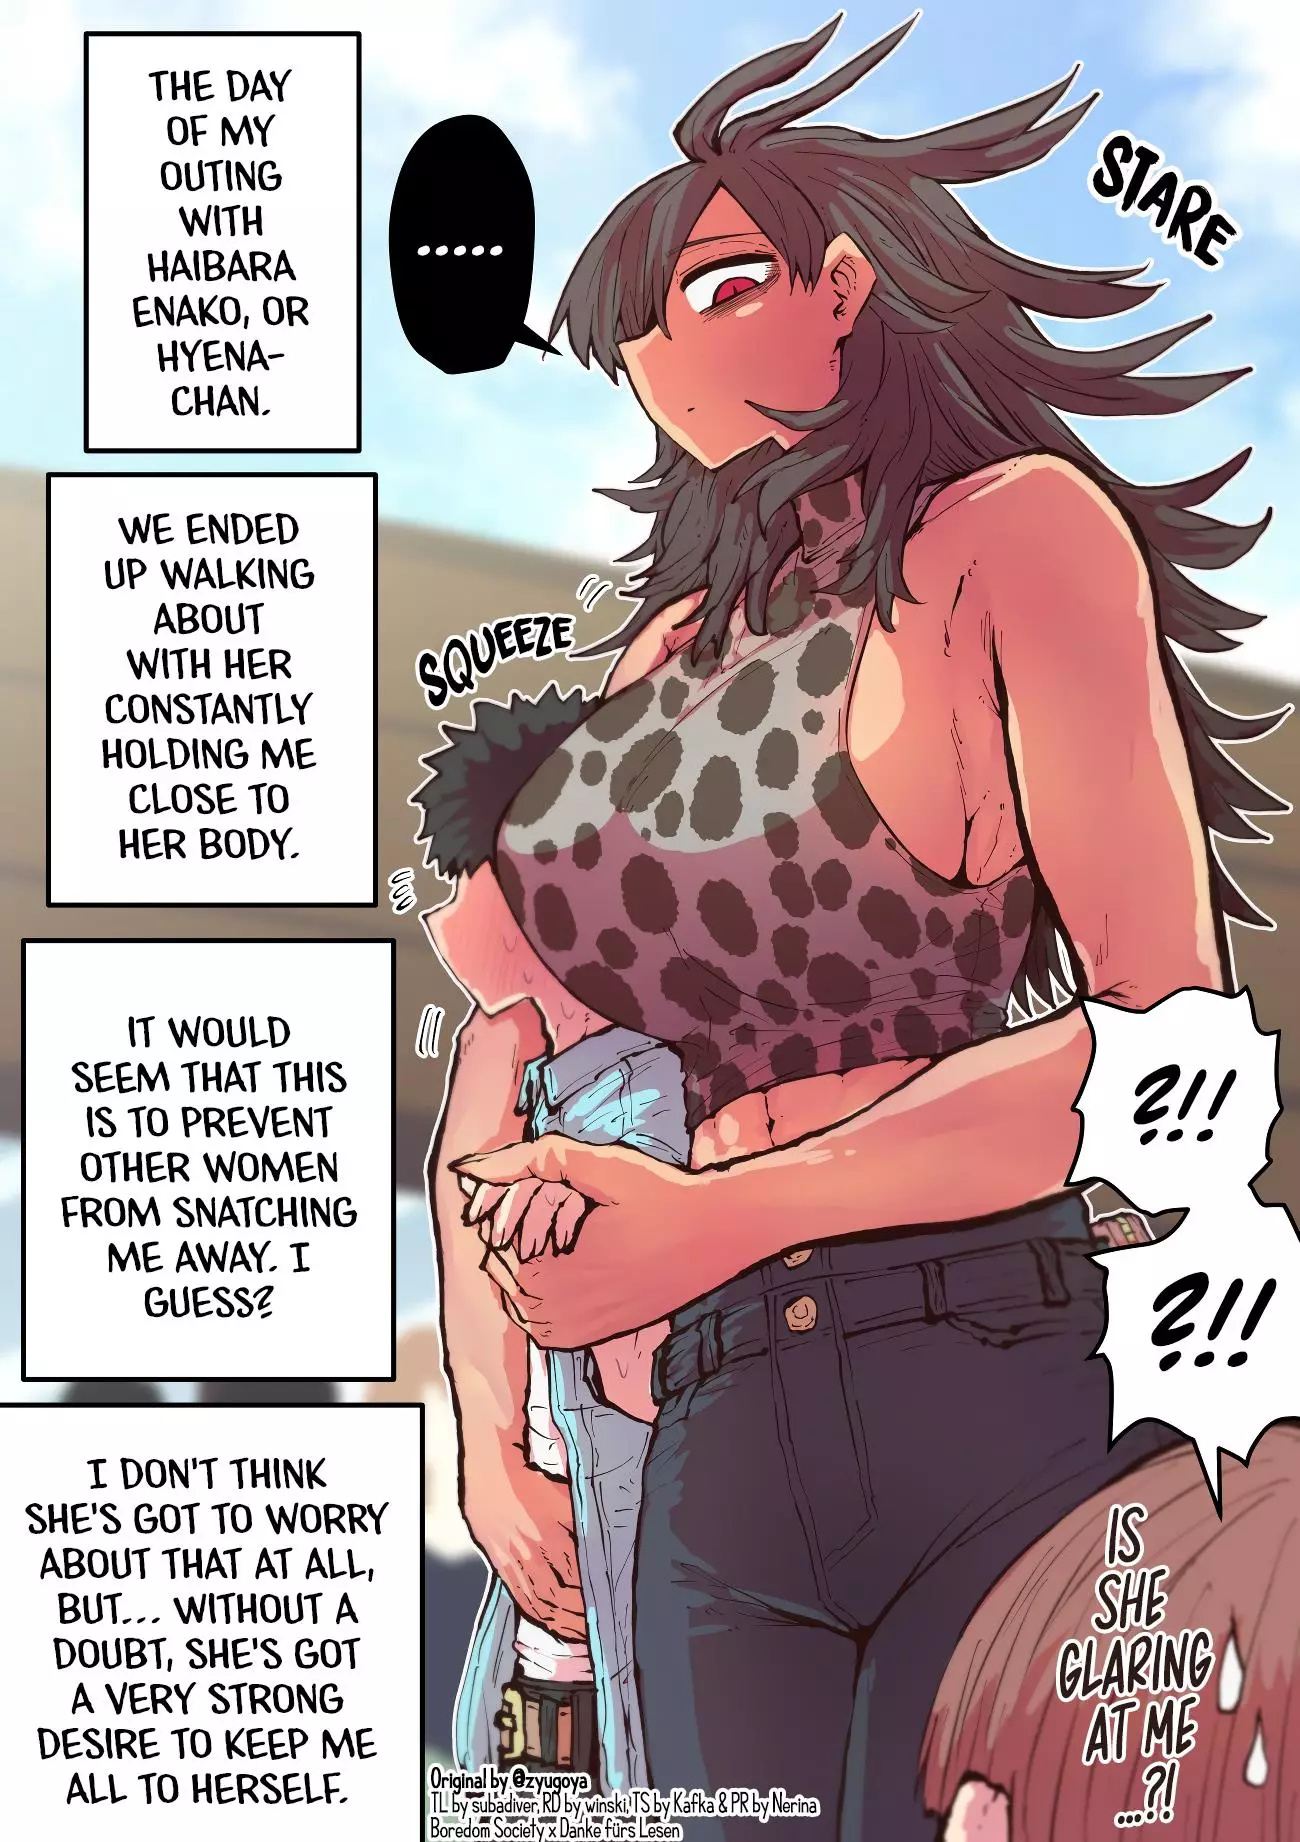 Being Targeted By Hyena-Chan - 6 page 1-7a1b7a84